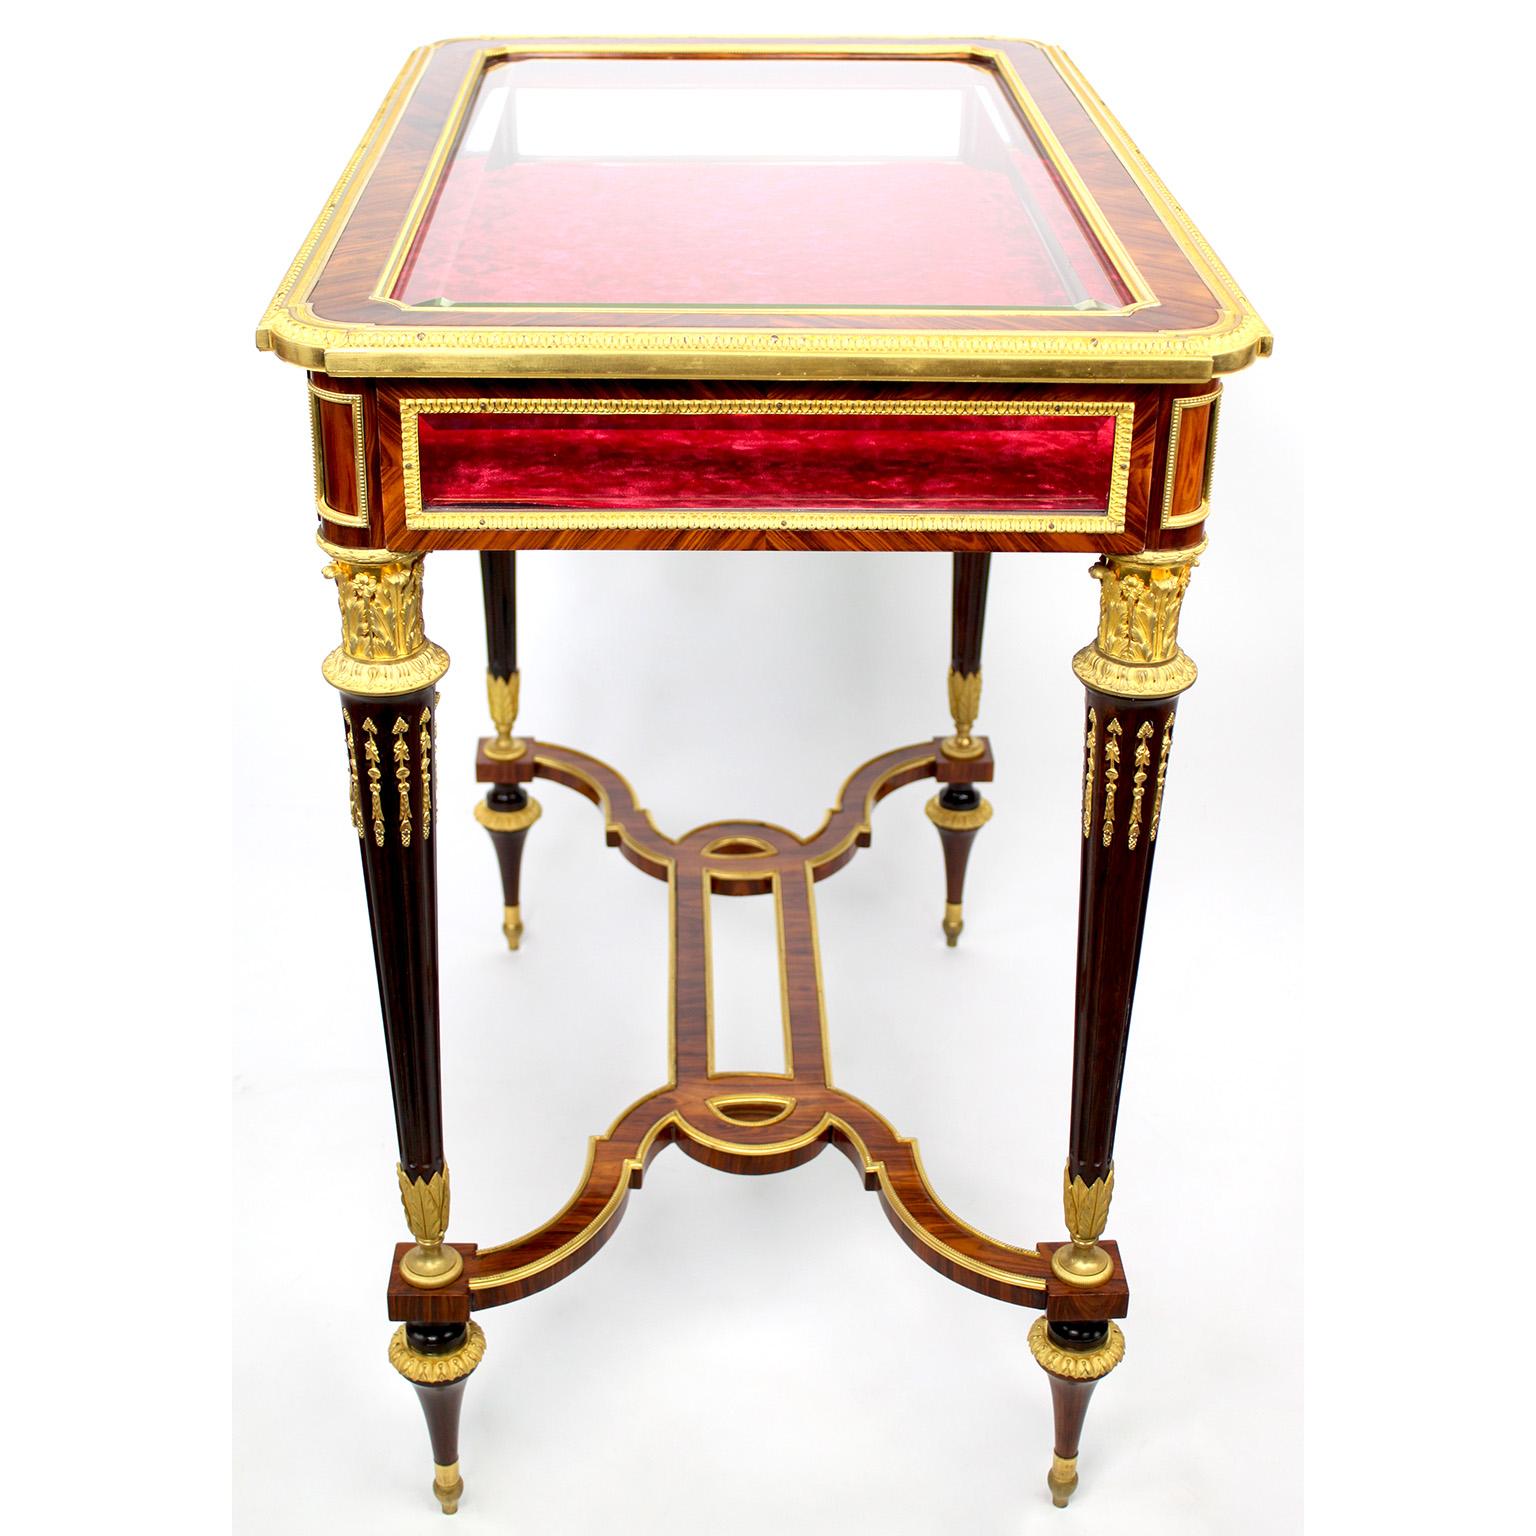 A 19th Century Louis XVI Style Ormolu Mounted Vitrine Table Attr. Henry Dasson  For Sale 1